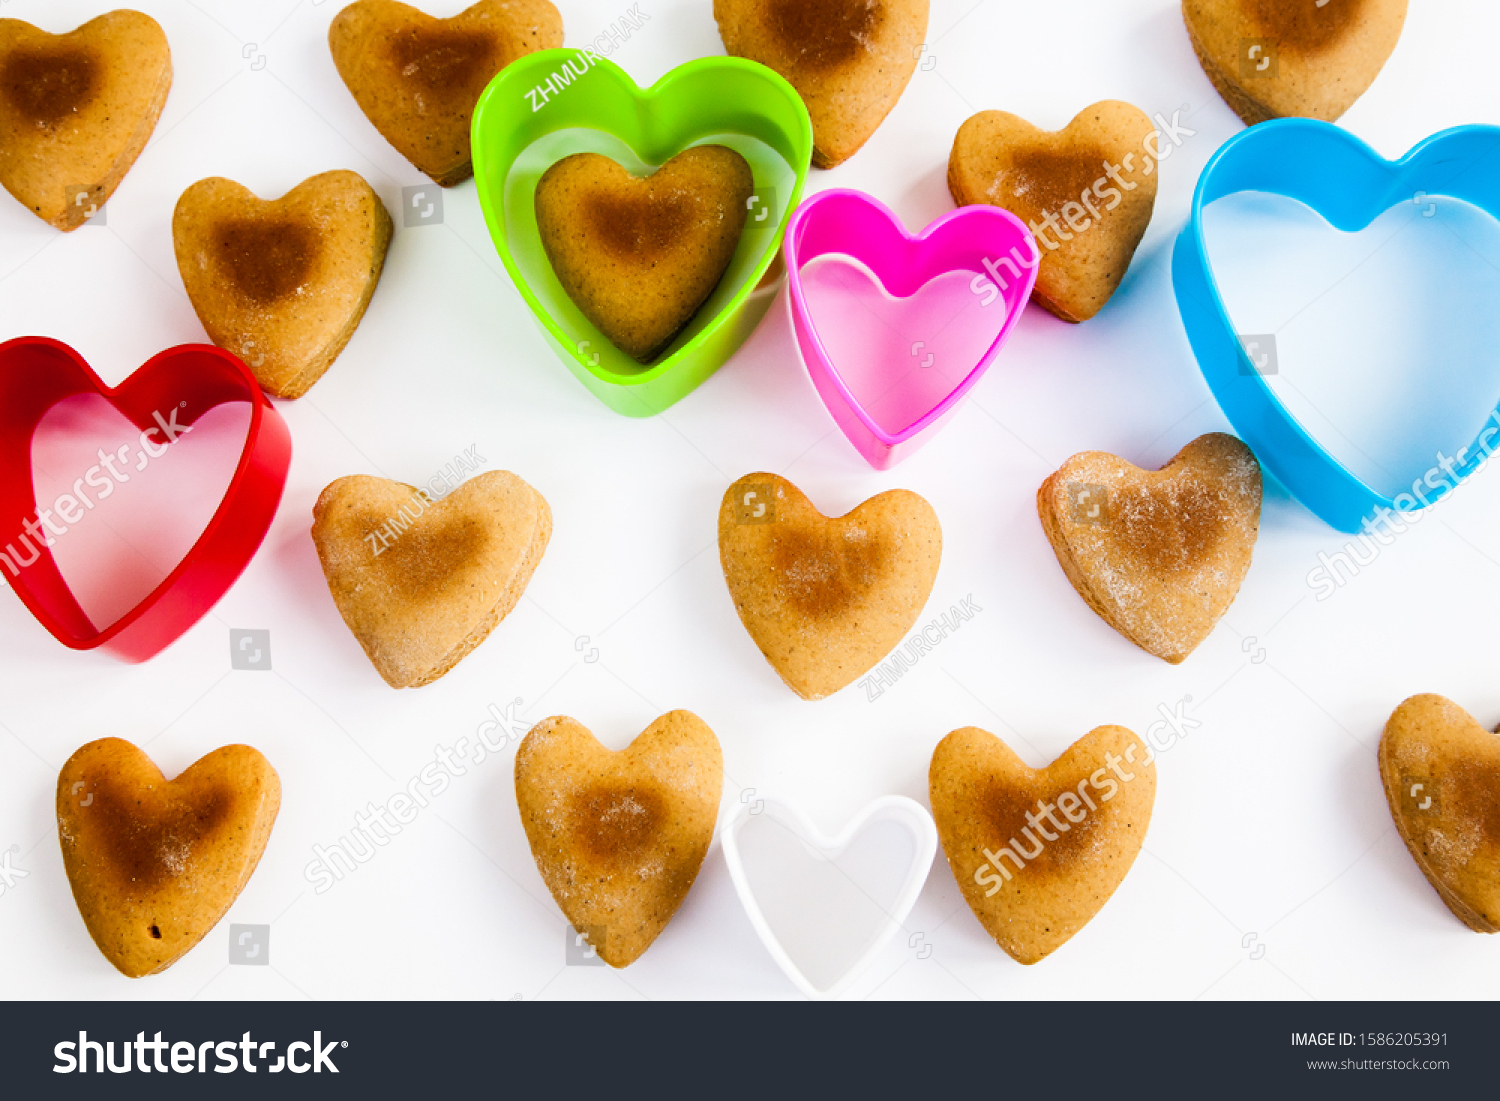 Heart shaped cookies on a white background with plastic shapes #1586205391